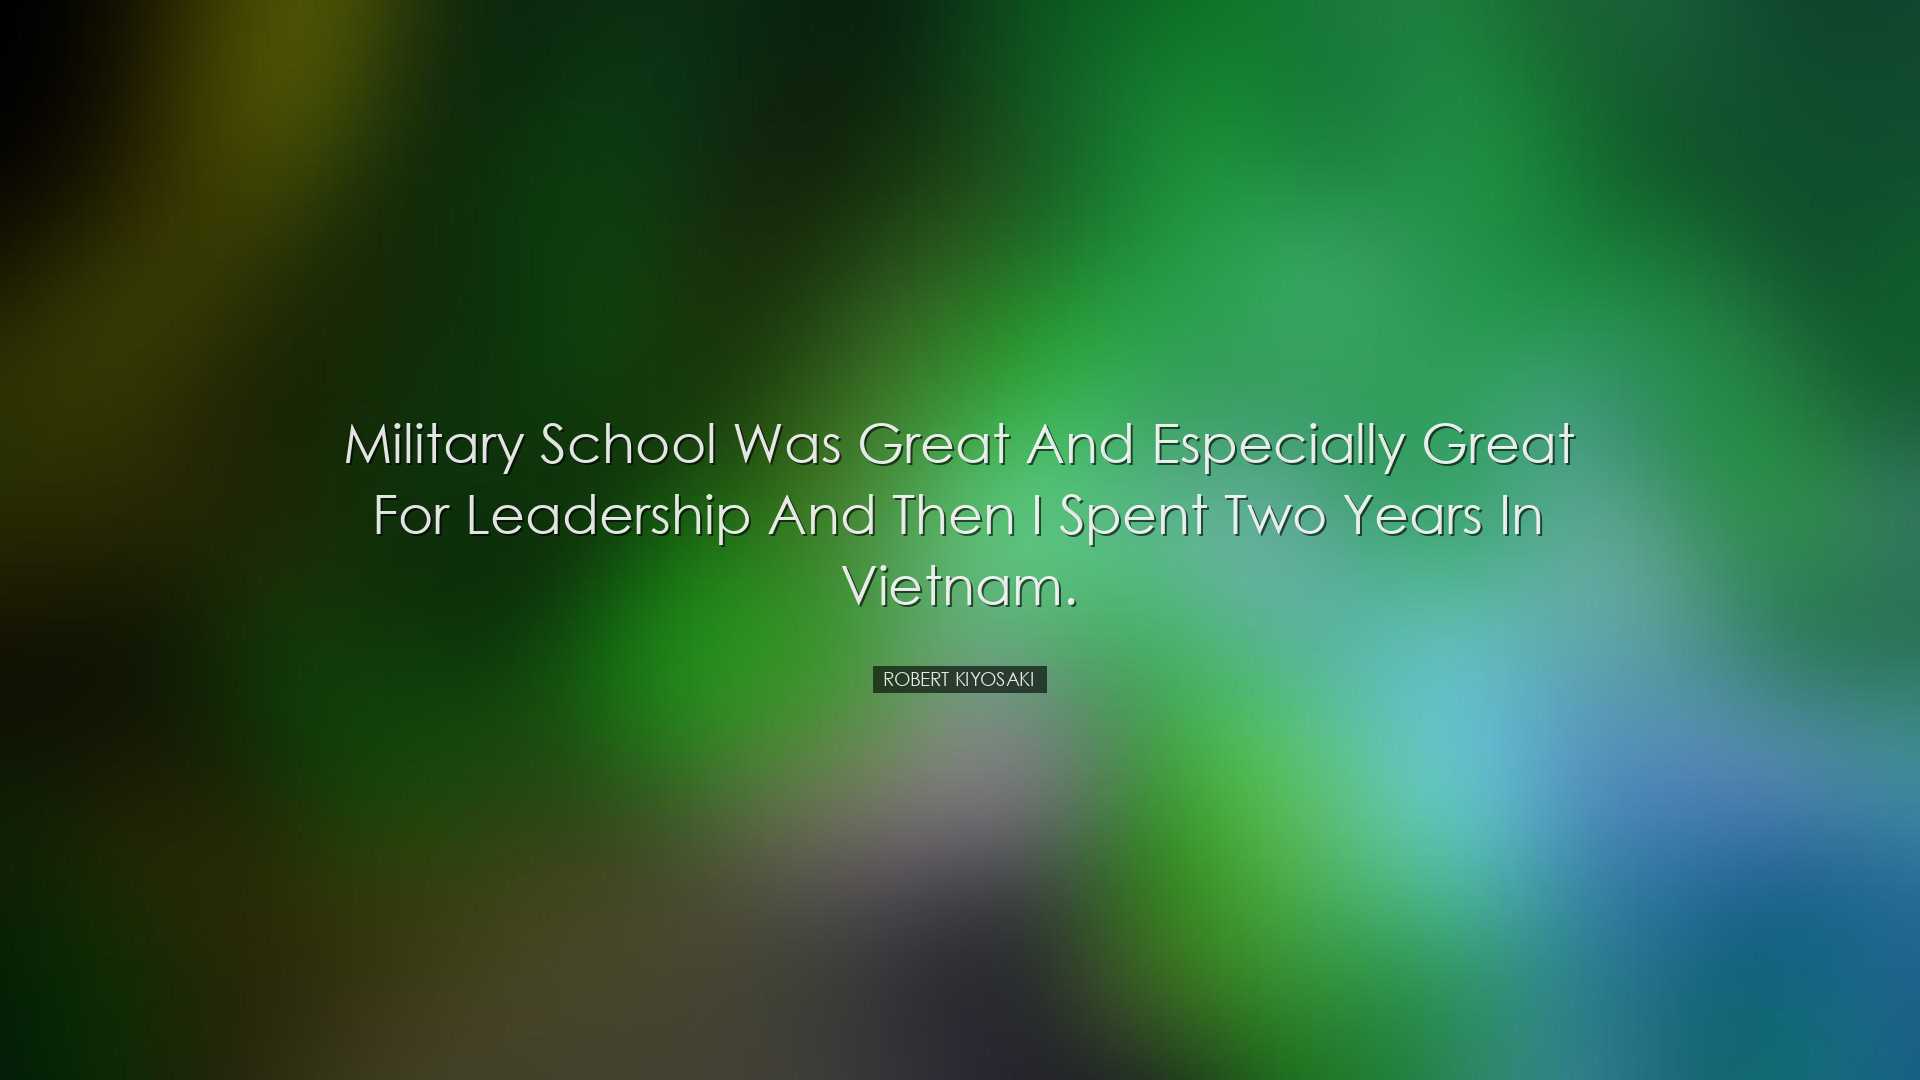 Military school was great and especially great for leadership and